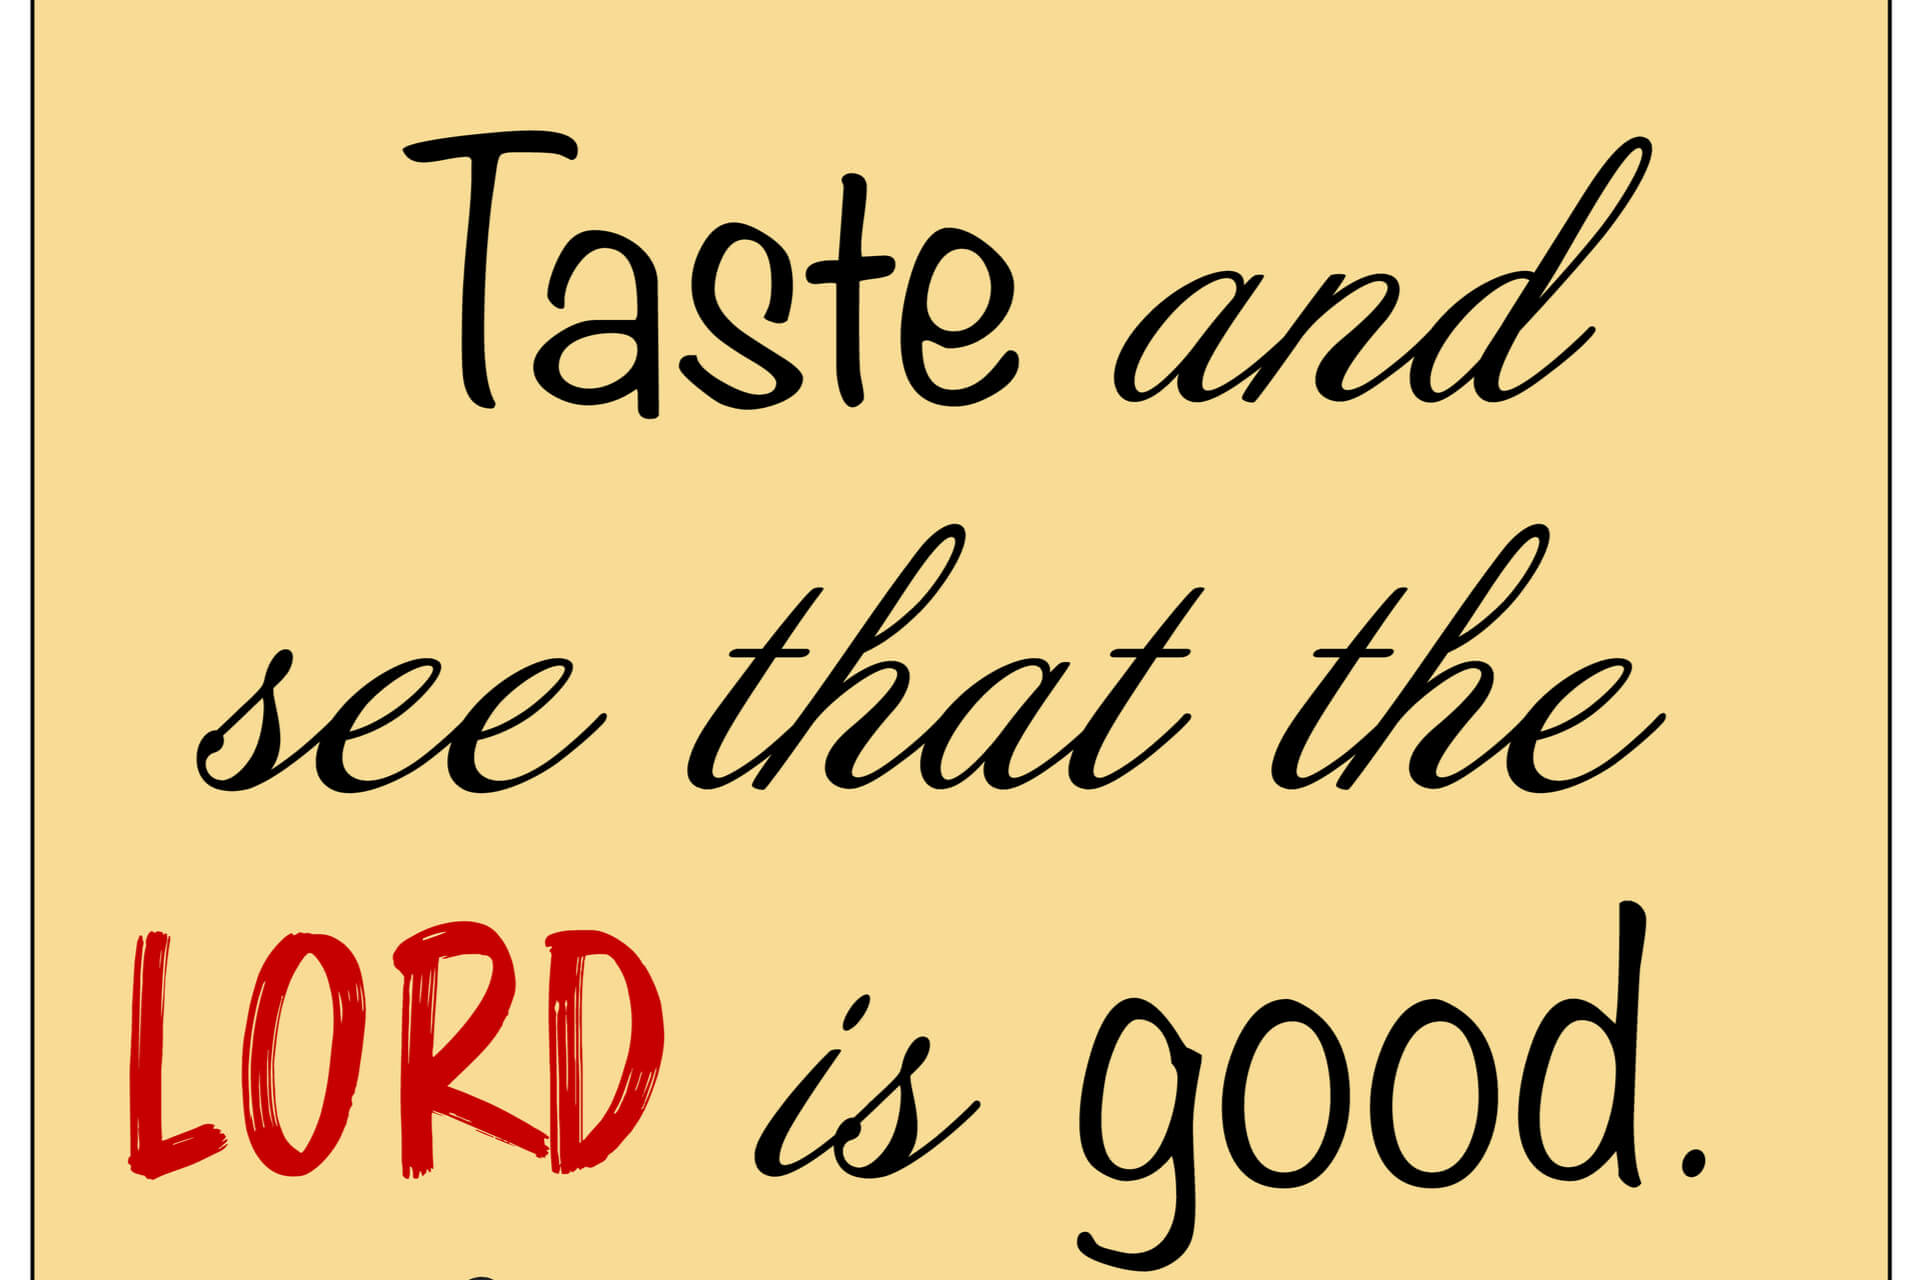 Oh, taste and see that the LORD is good! Blessed is the man who takes refuge in him!